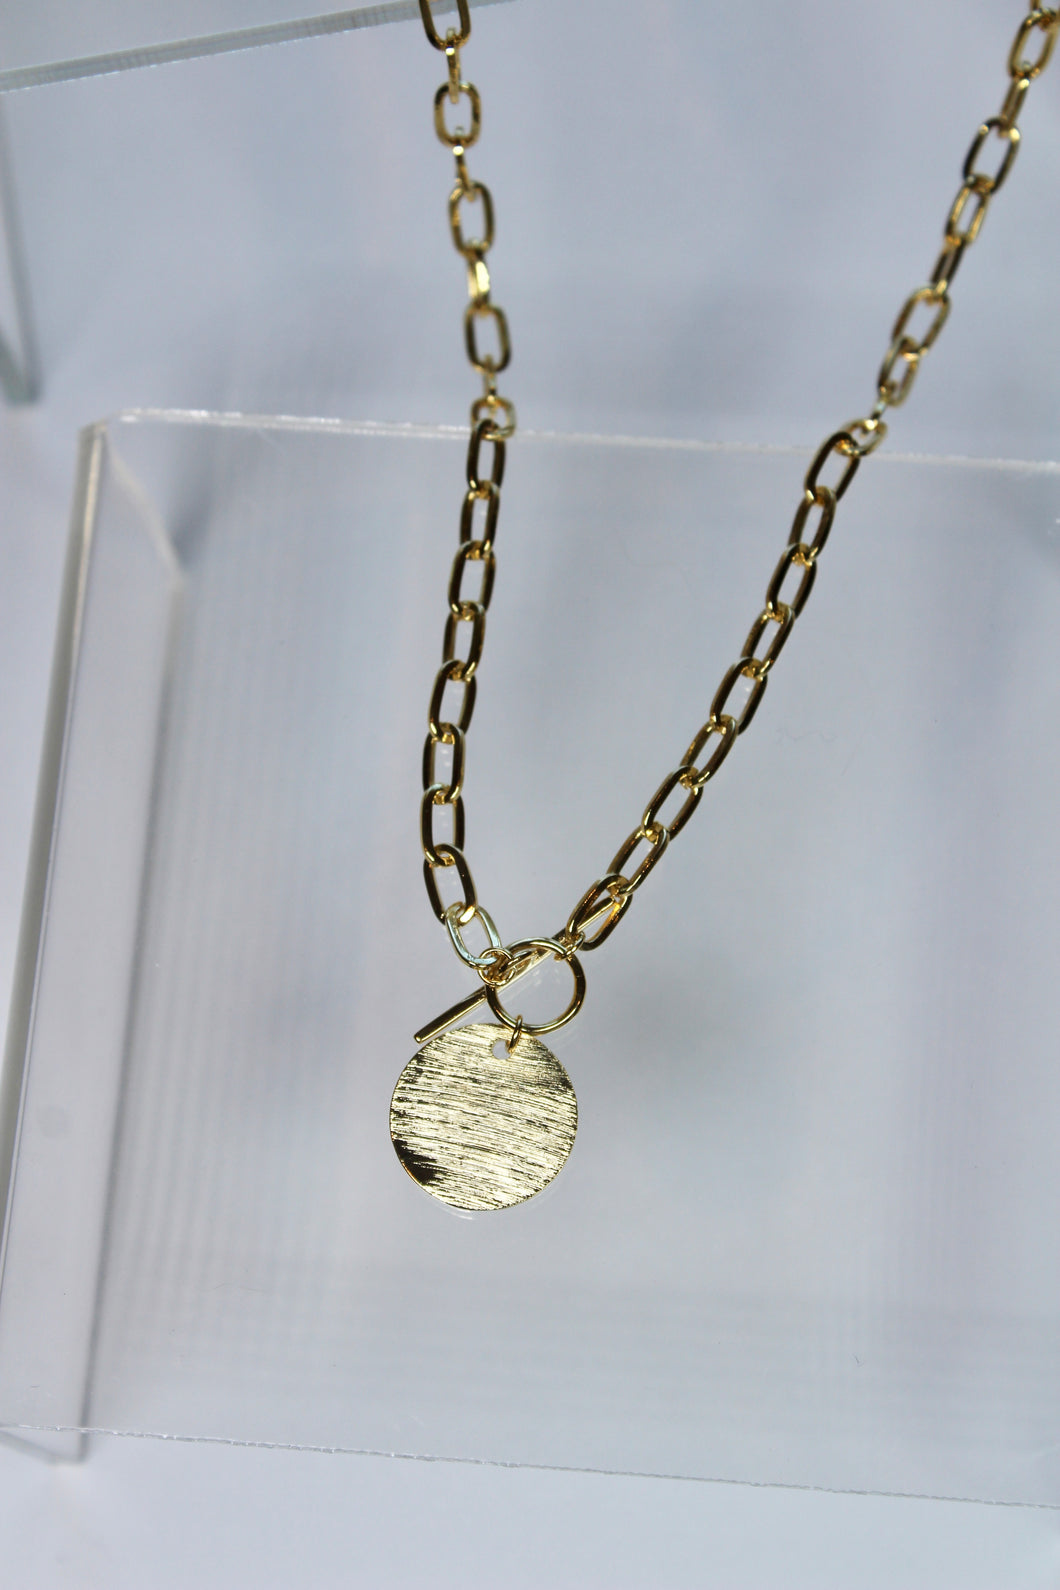 18K GOLD LINK NECKLACE - The Lovely Sun